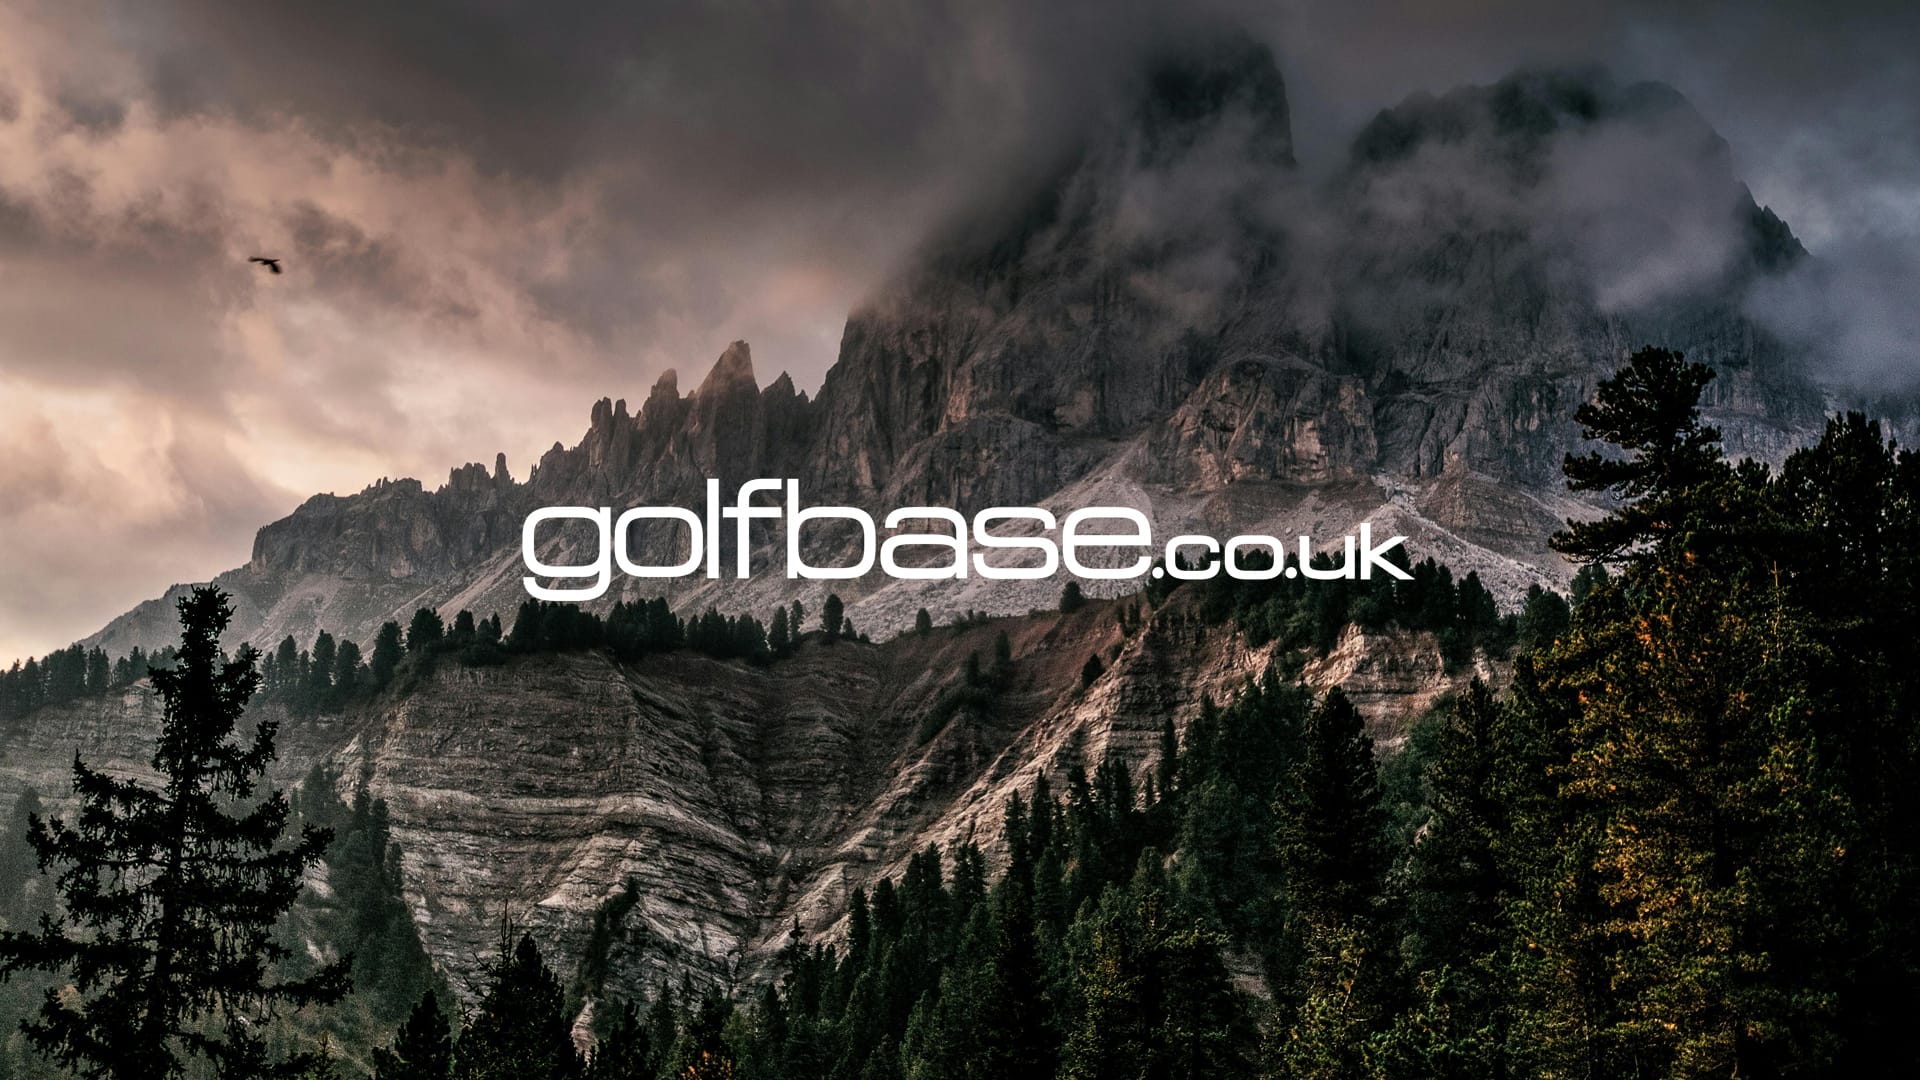 Exciting News: New Berghaus Gear Now Available at Golfbase.co.uk!